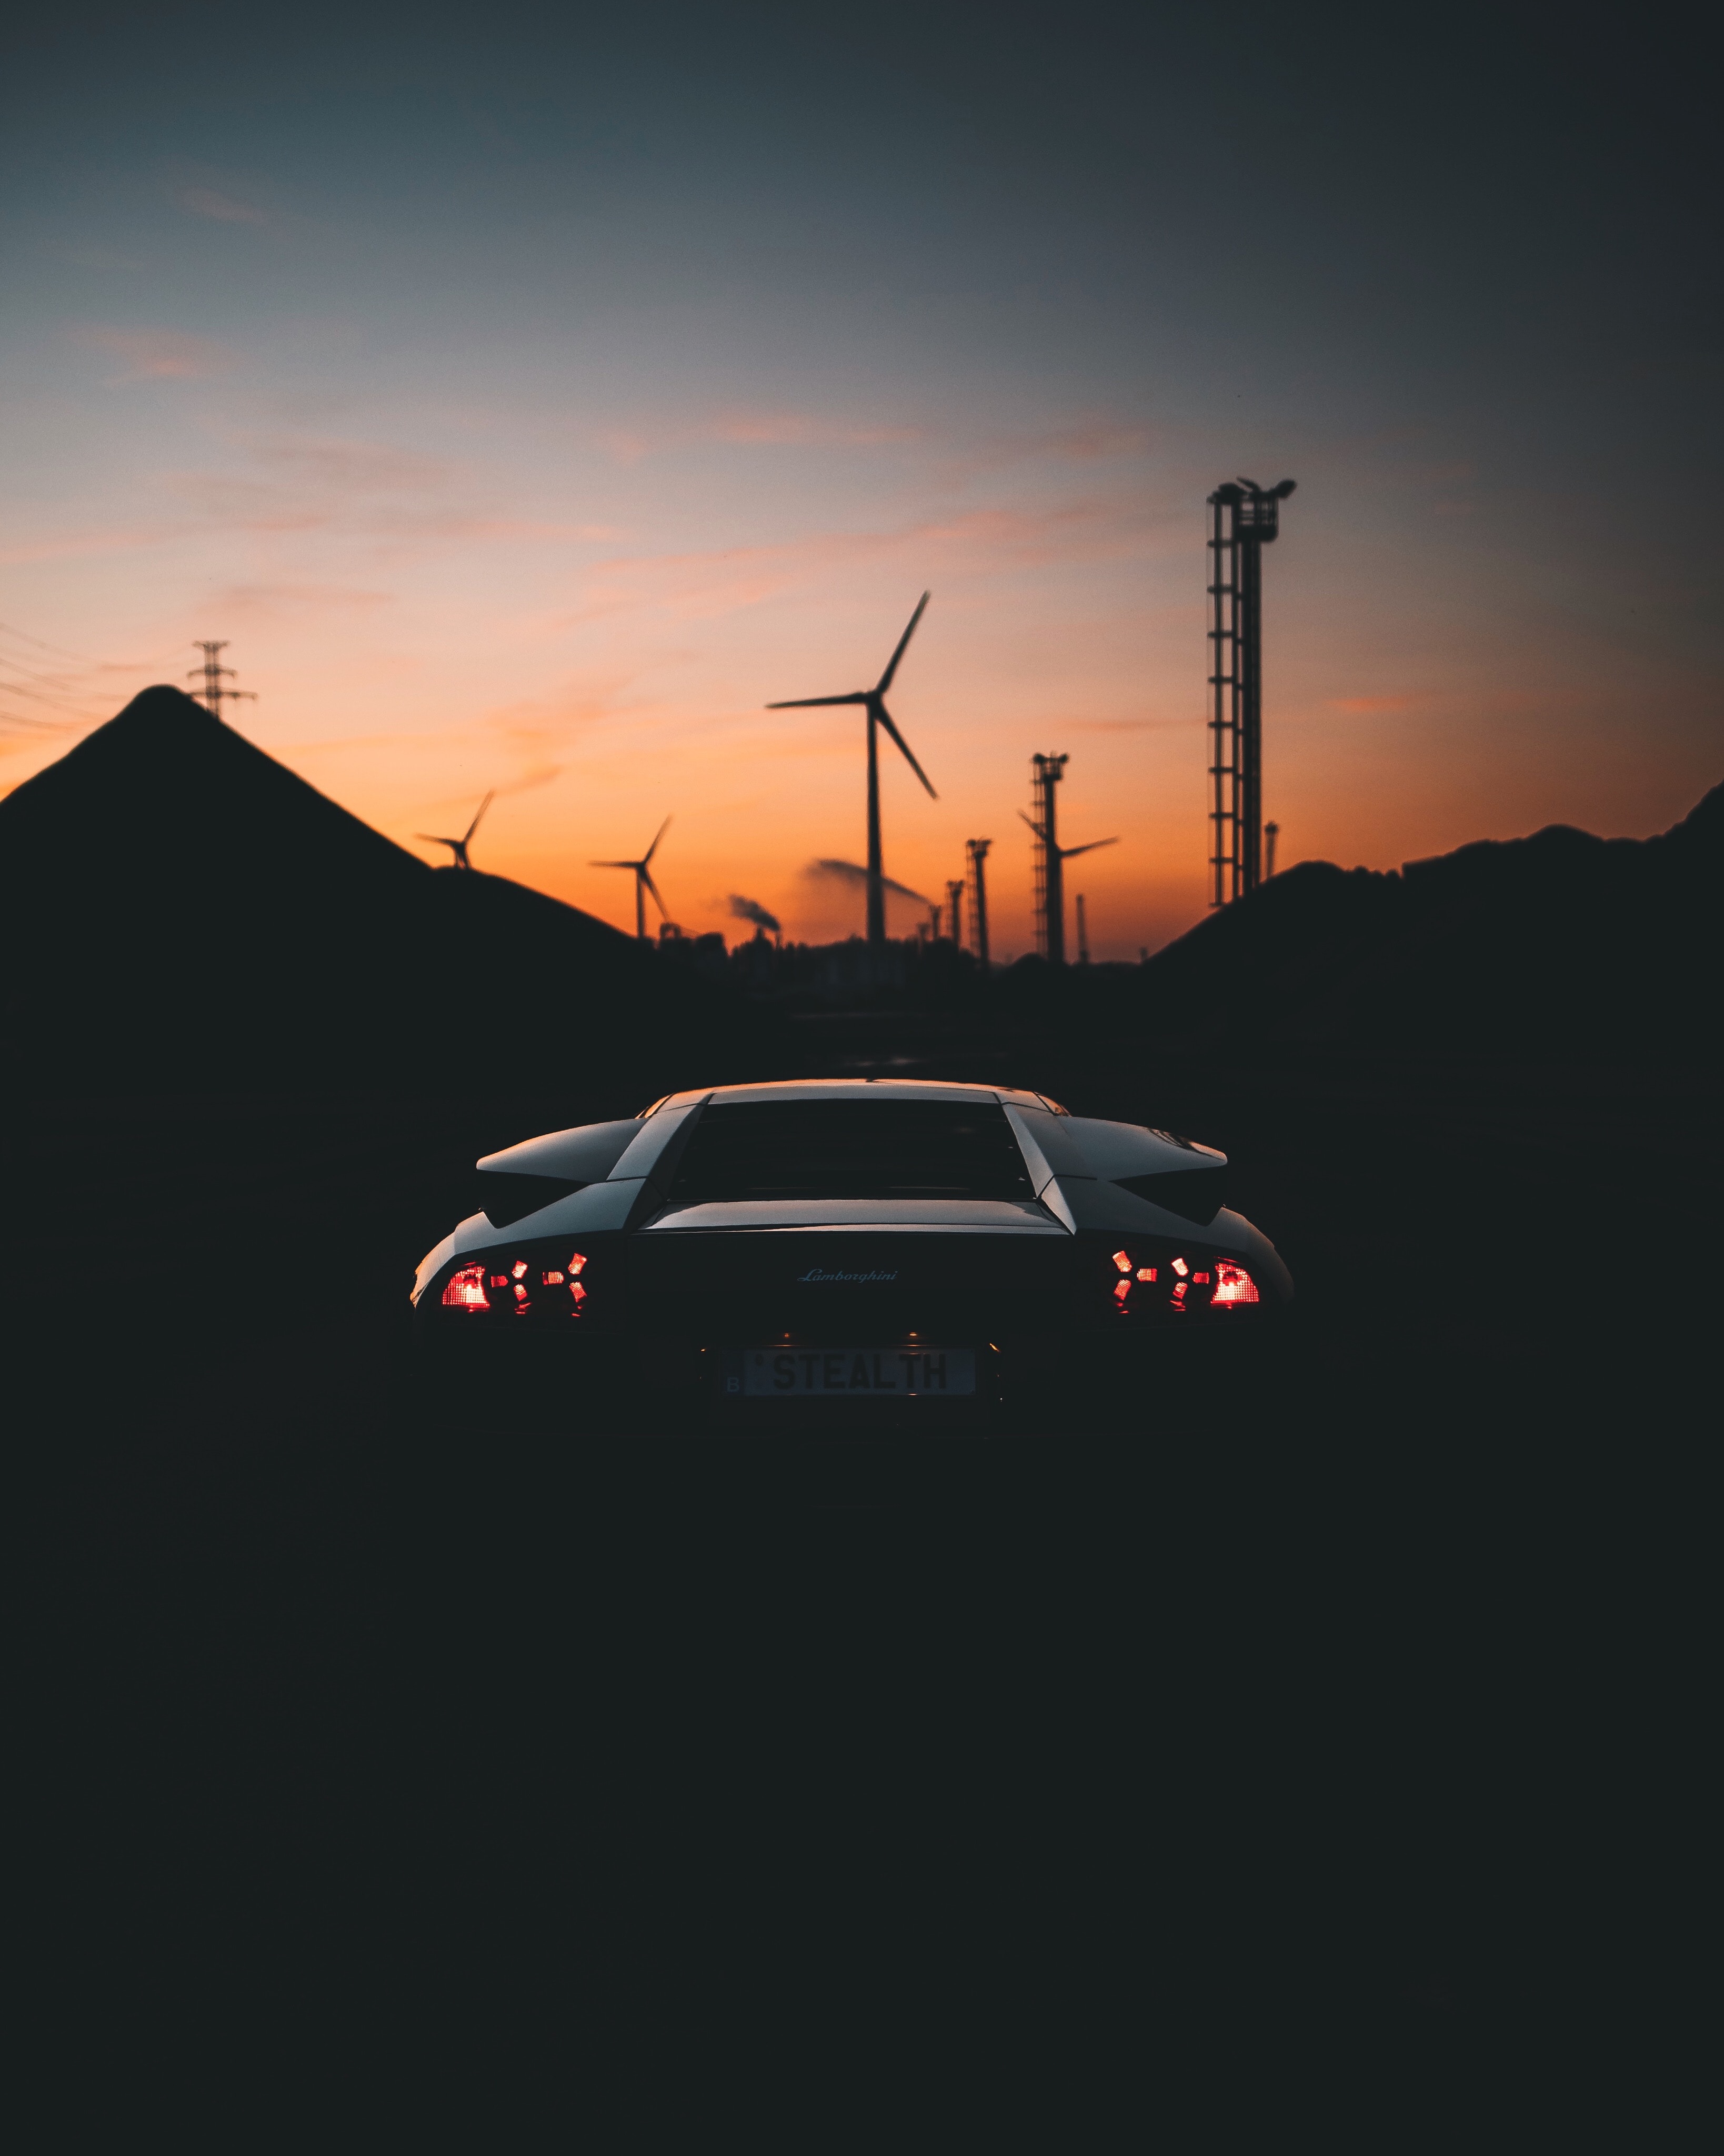 153739 download wallpaper twilight, sports, cars, dark, car, machine, dusk, sports car, back view, rear view screensavers and pictures for free